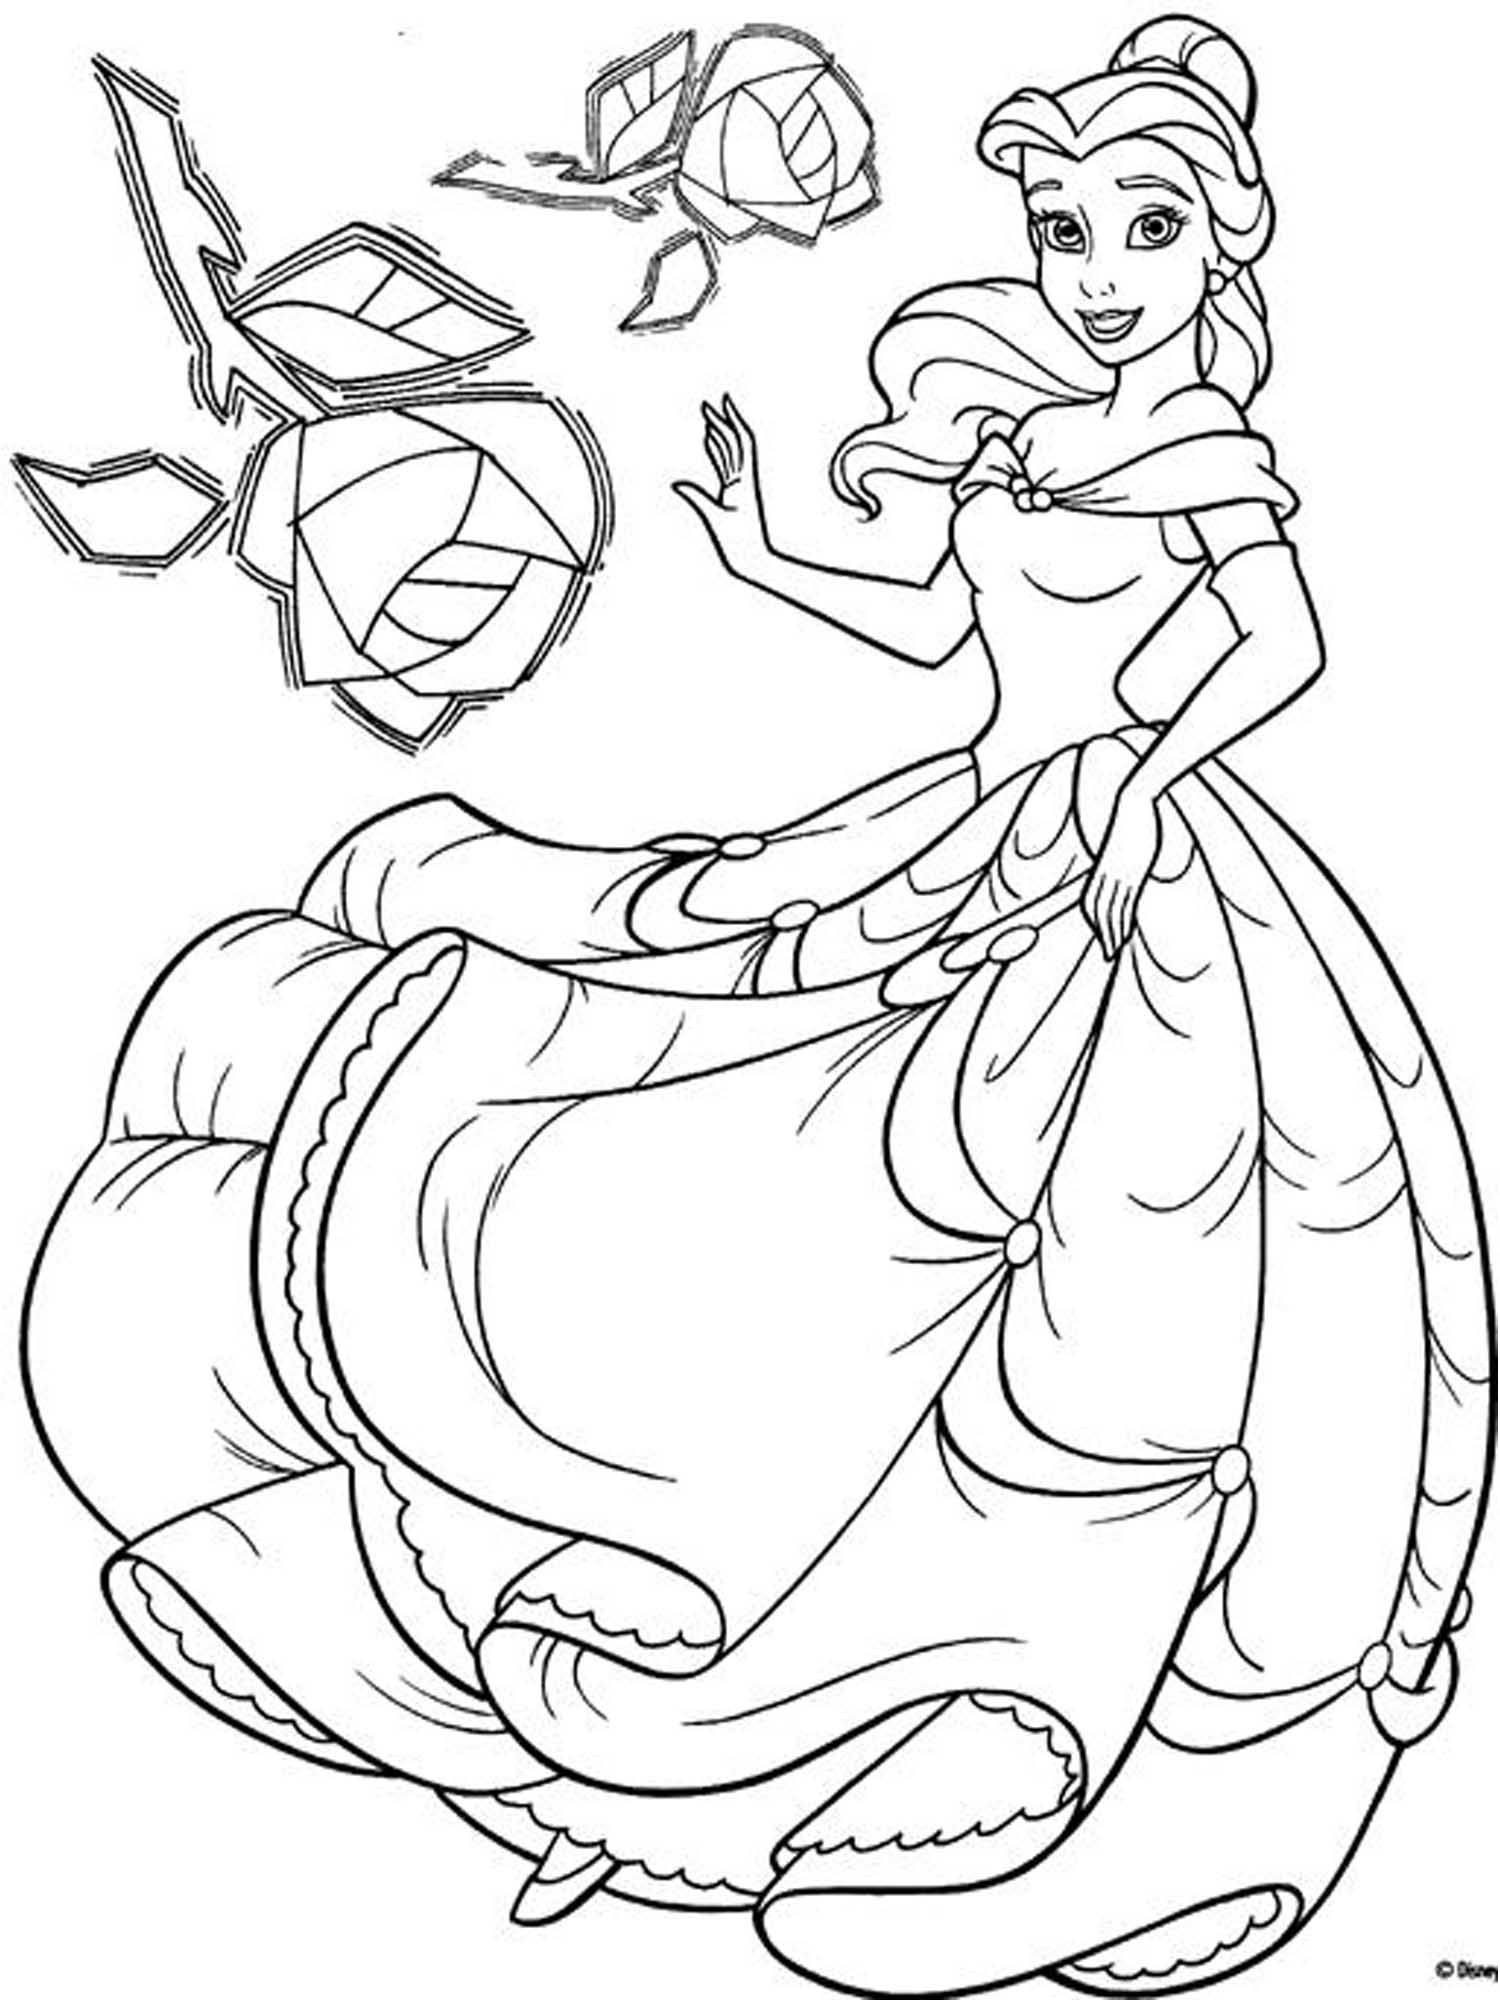 Princess Belle Coloring Pages to Print Wallpaper